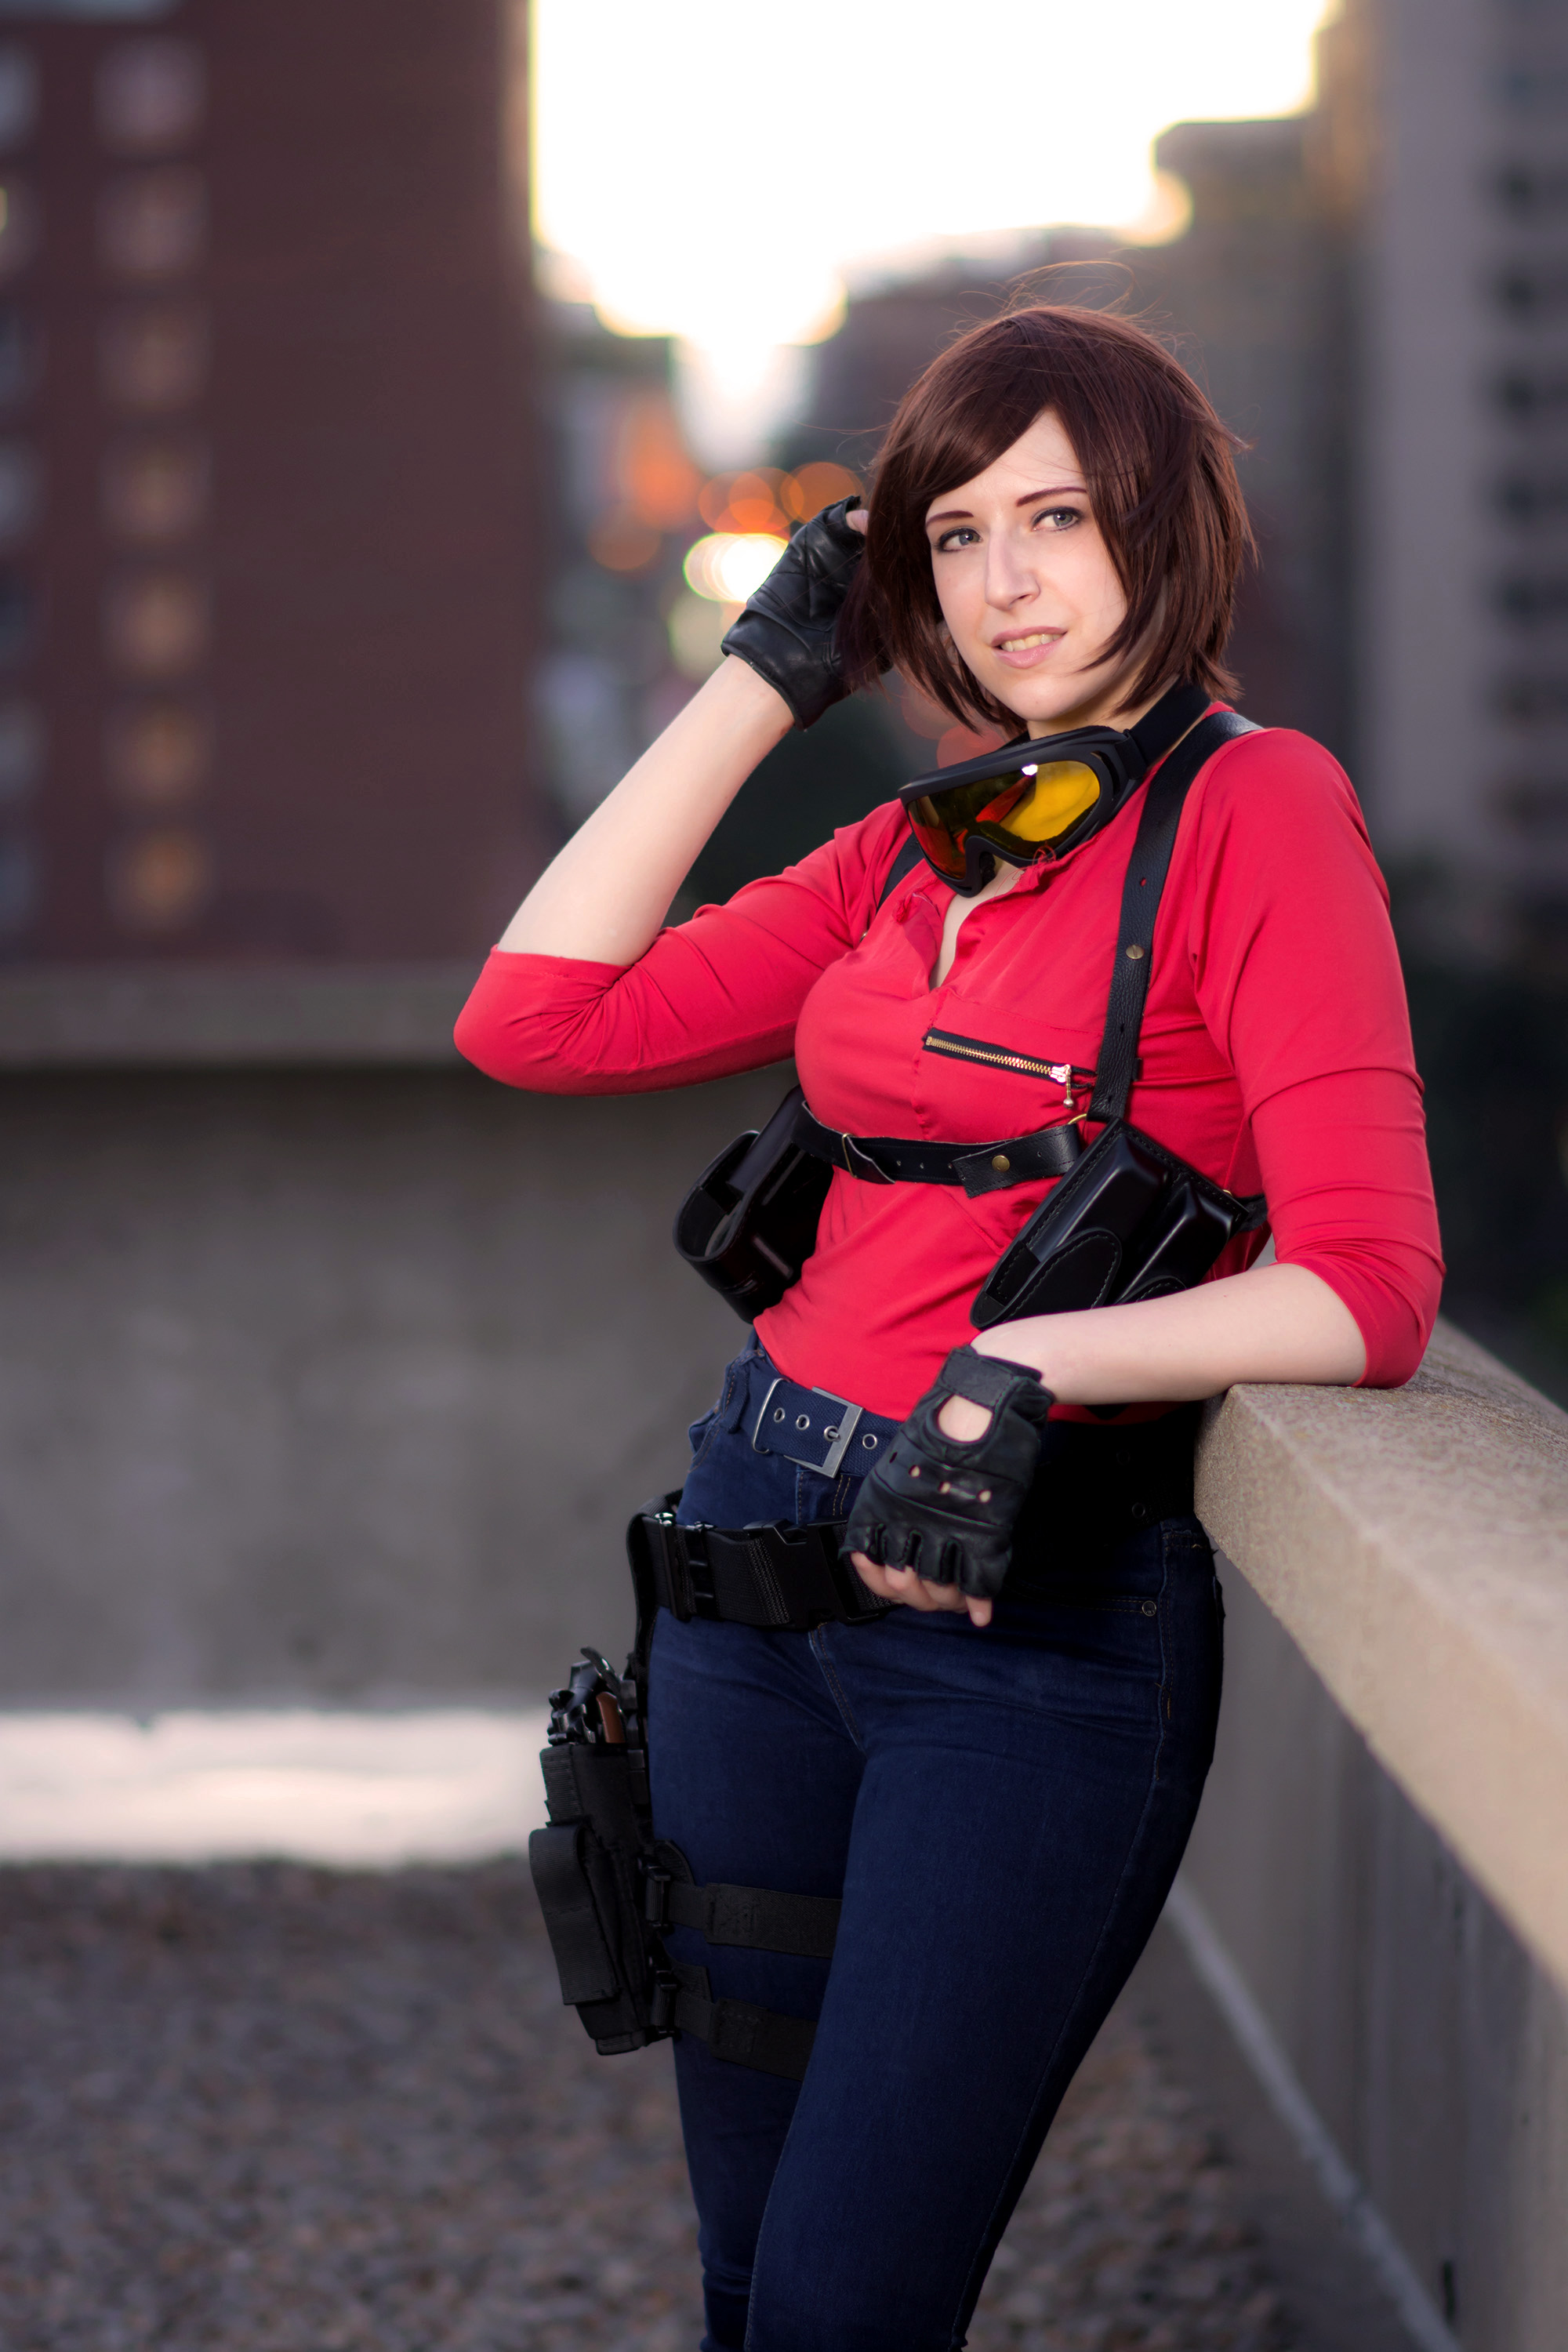 Revelations 2 Sniper Claire costume (outfit by DigitalZky) : r